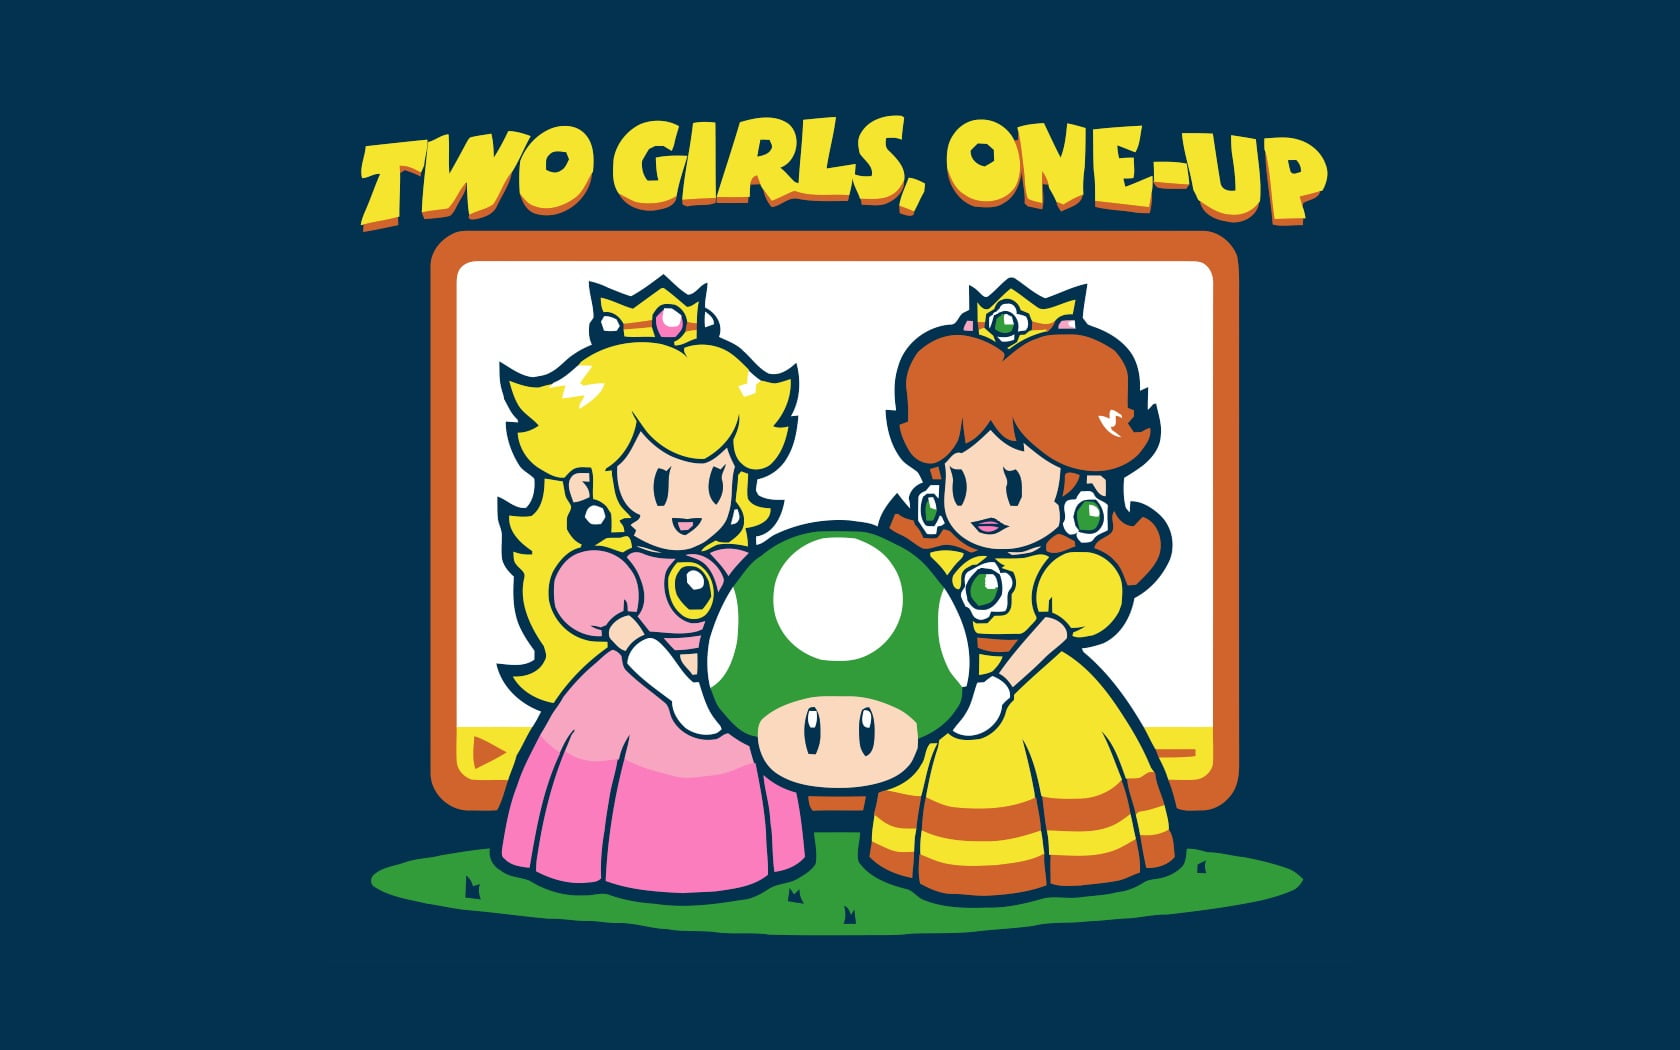 Princess Peach and Rebecca from Super Mario illustration, one up